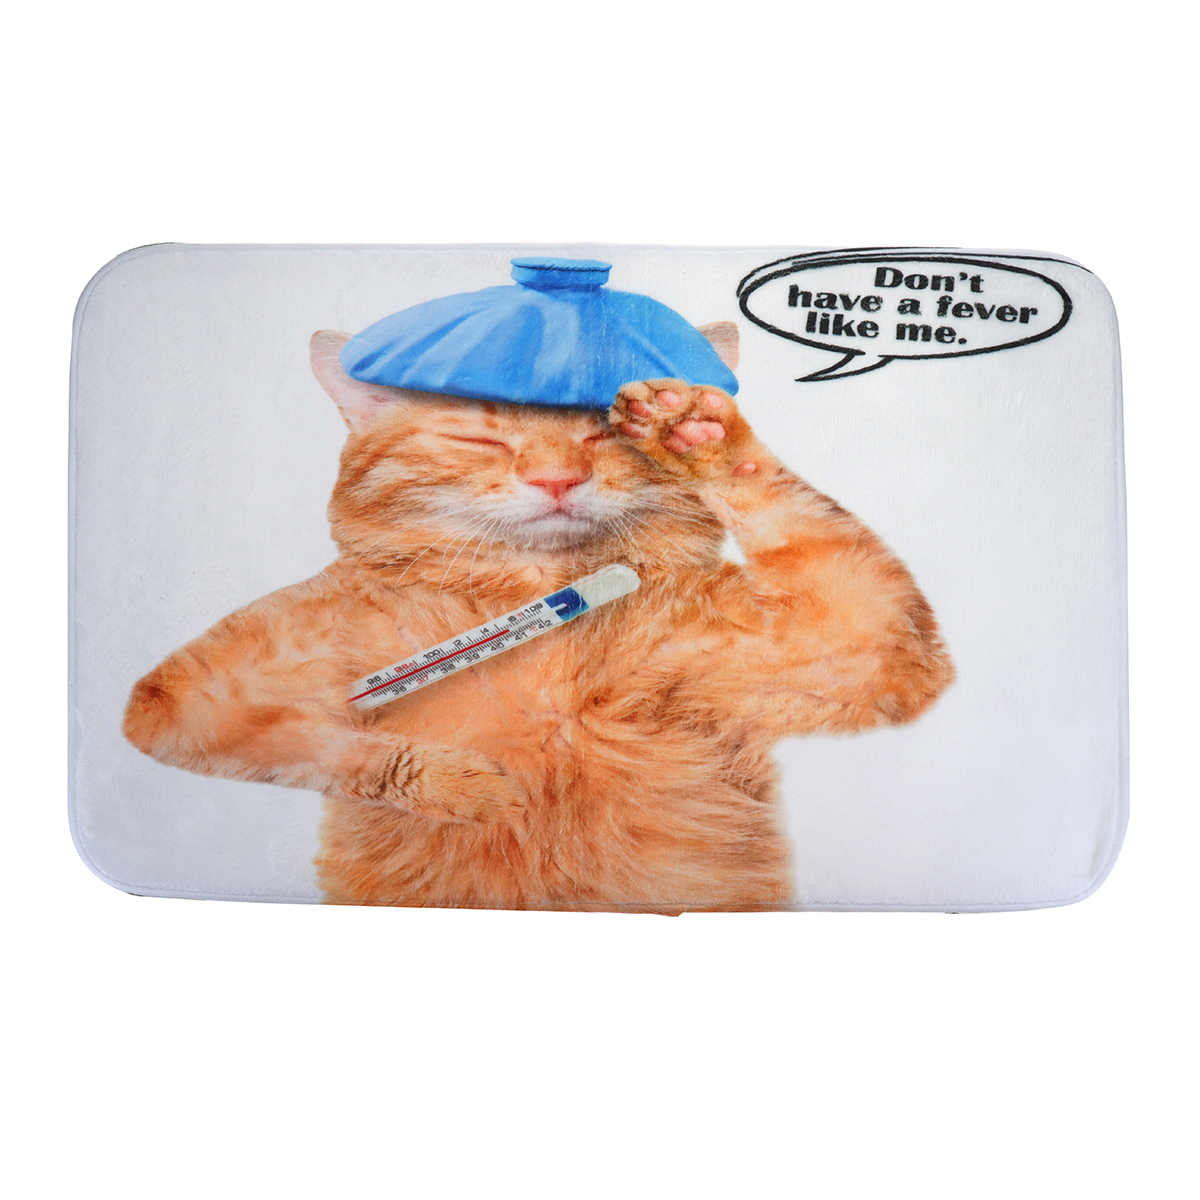 Toilet-Seat-Covers-Bathroom-Non-Slip-Thermometer-Fat-Cat-Pedestal-Rugs-Lid-Toilet-Covers-Bath-Mats-1411646-8